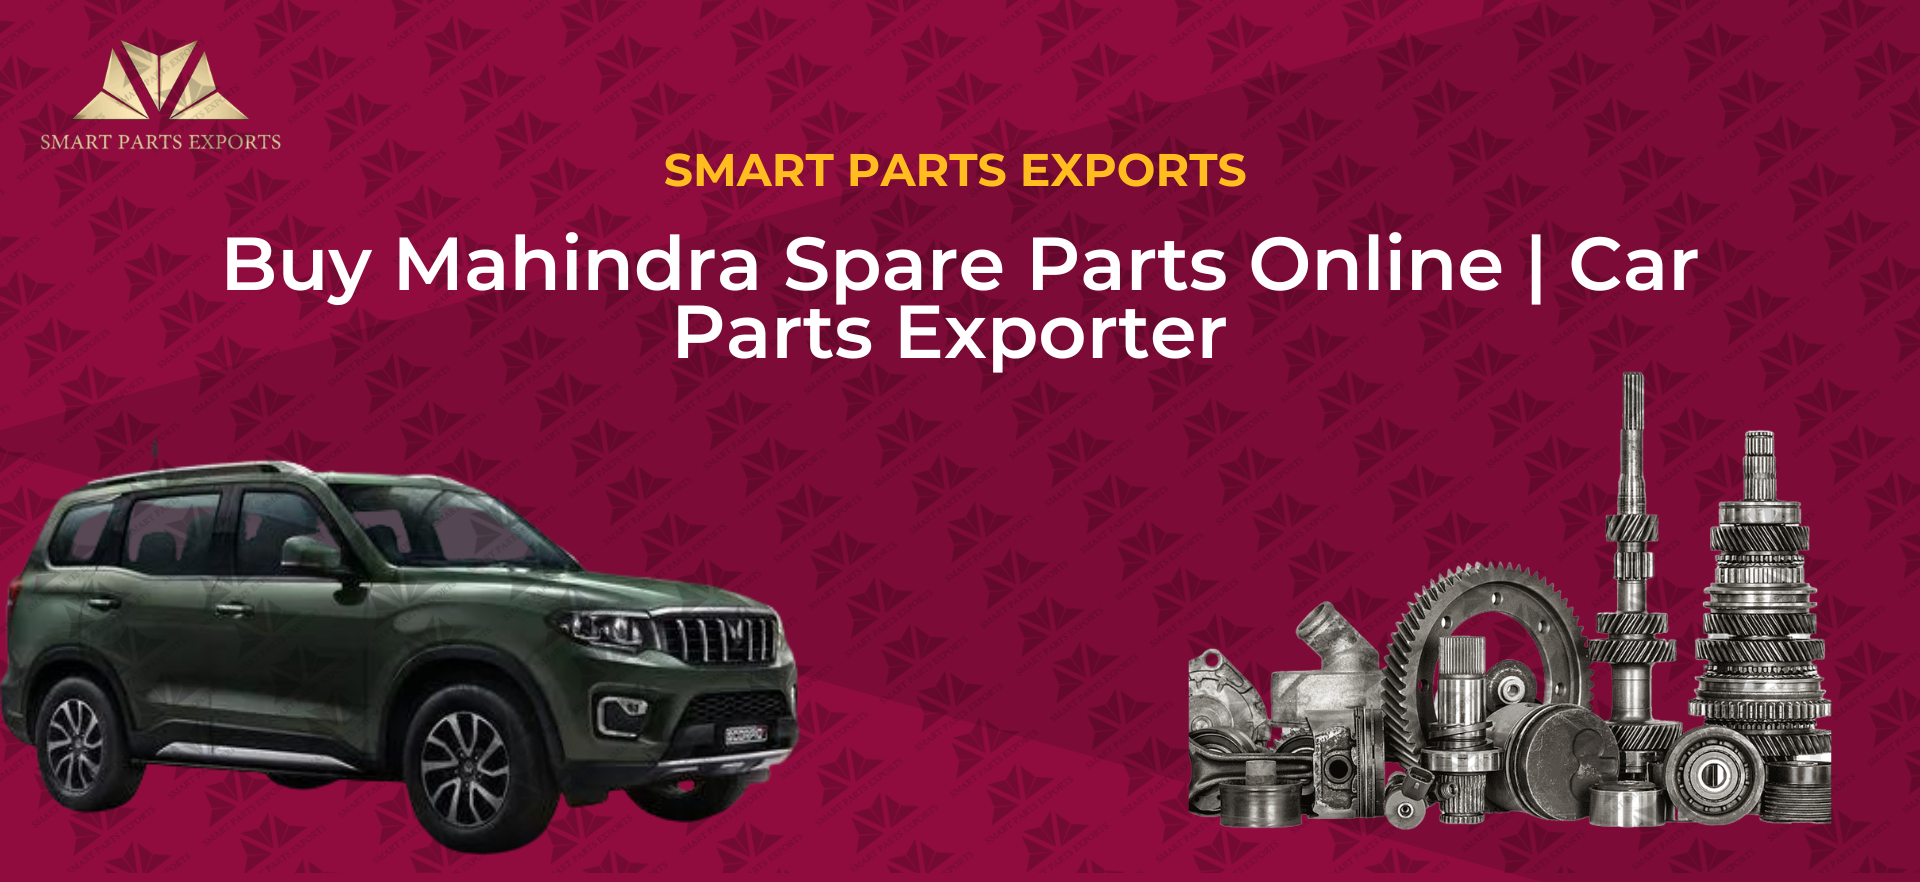 Buy Mahindra Spare Parts Online | Car Parts Exporter 